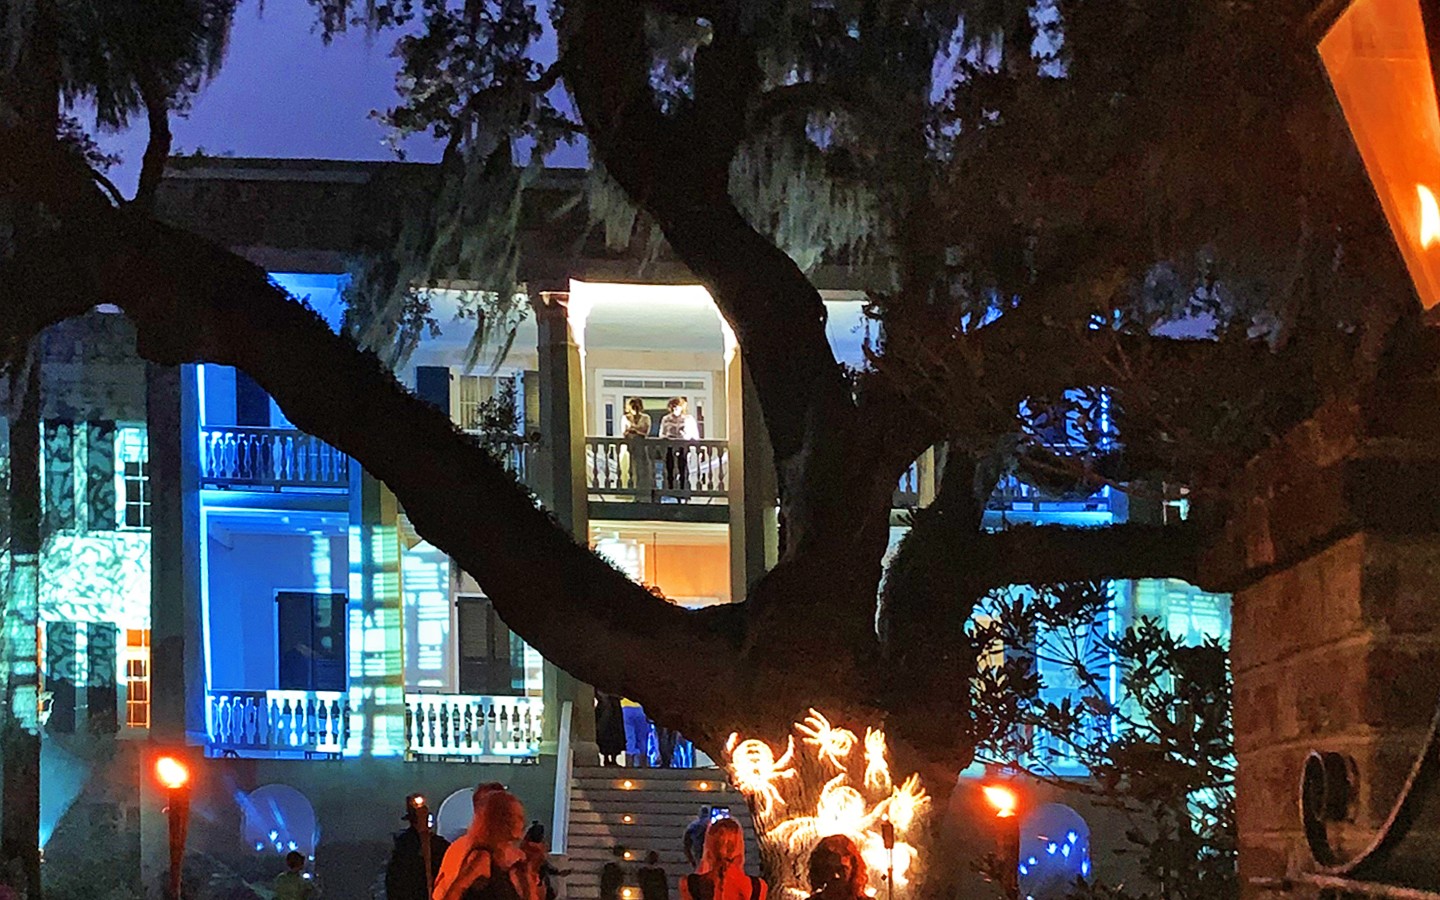 Haunted Castle in Beaufort, South Carolina - Photo by PickleJuice